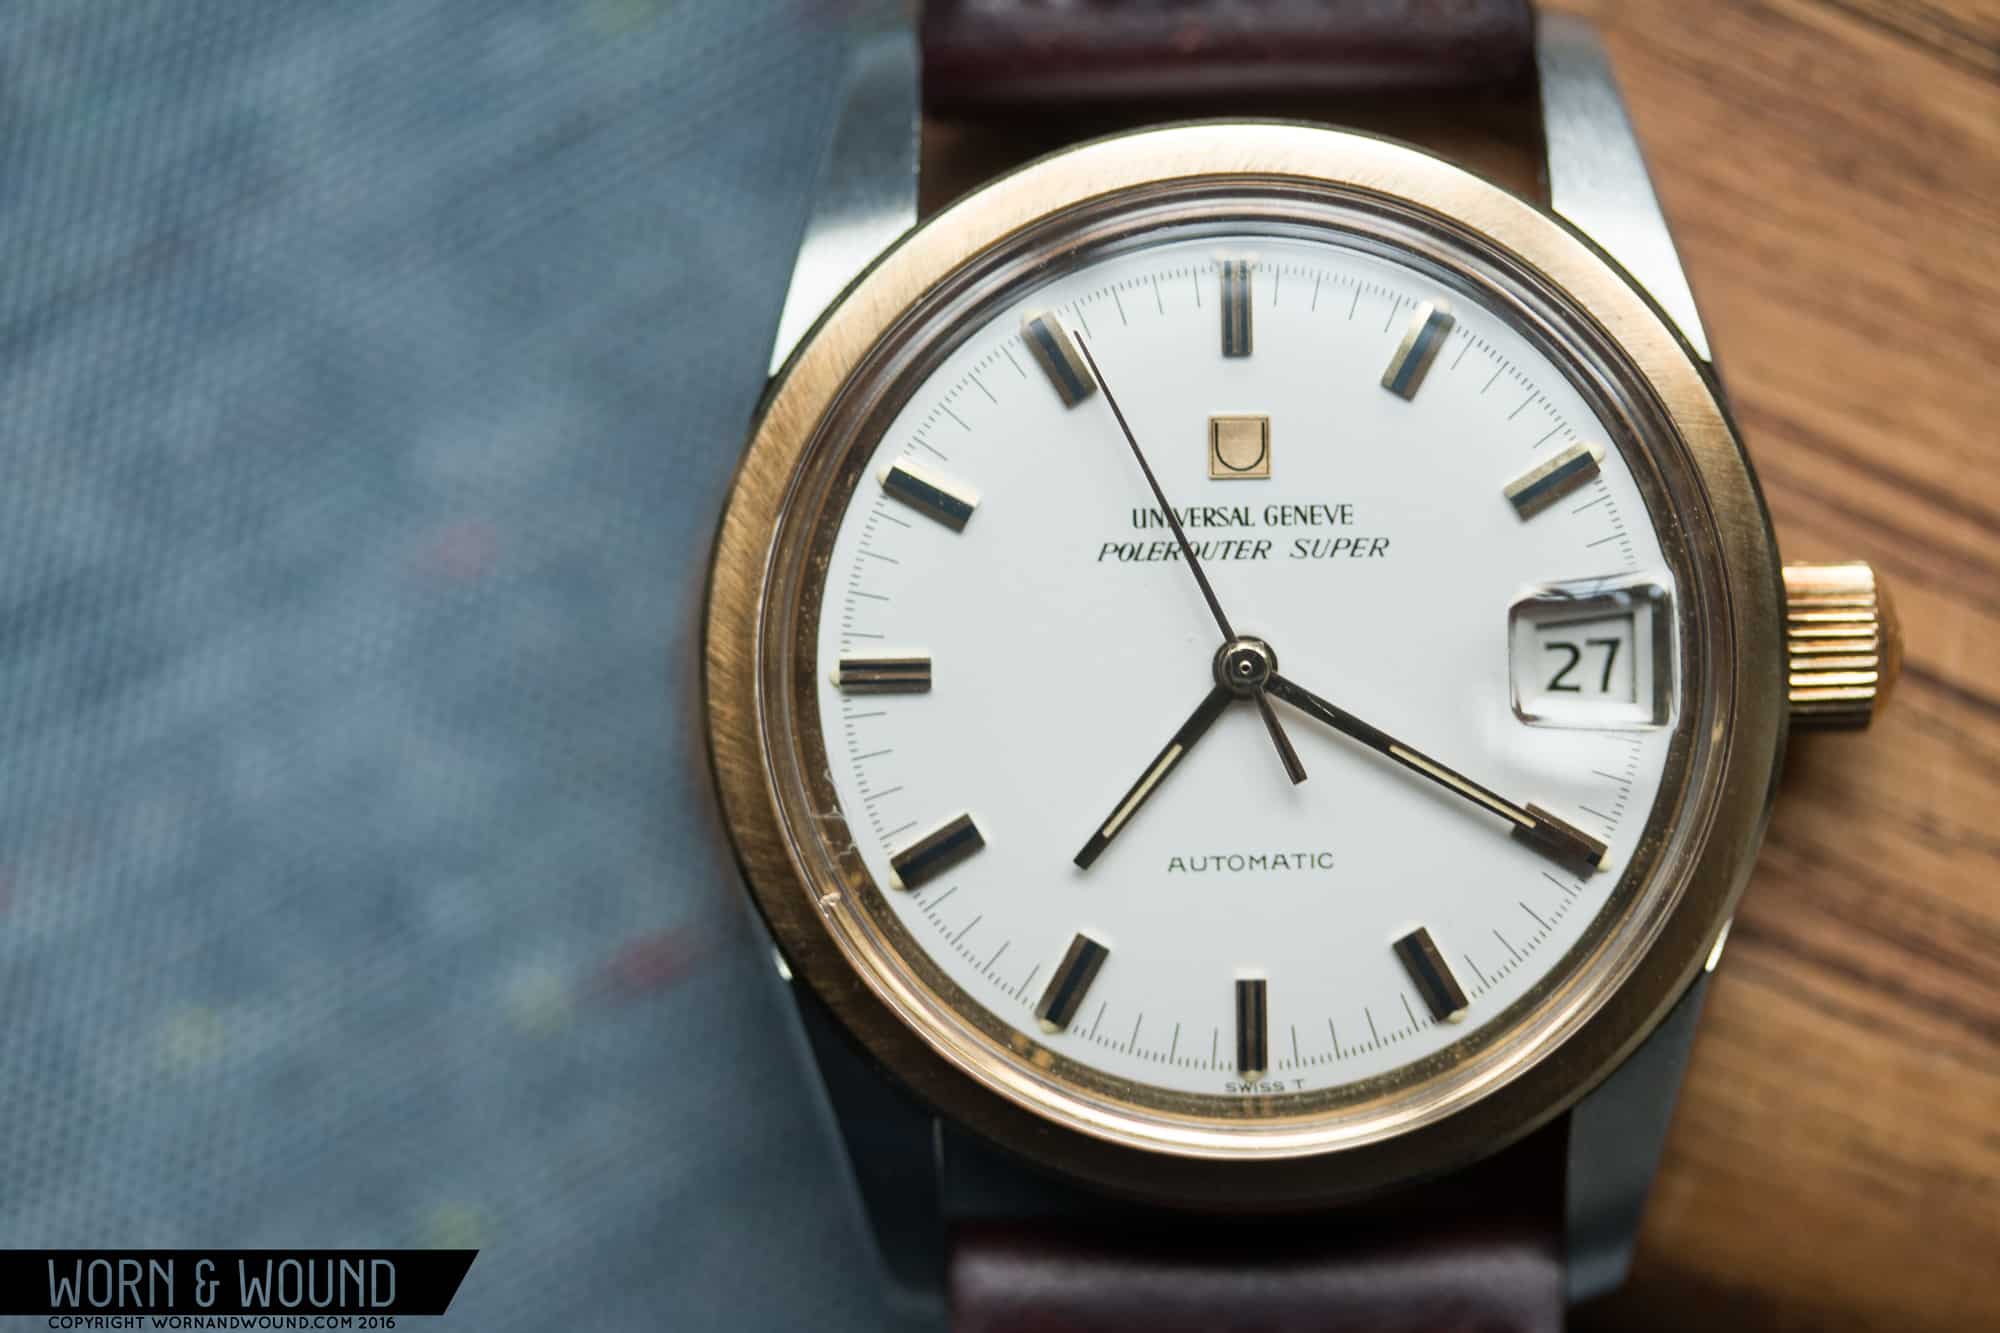 Watches, Stories, and Gear: Universal Genève Polerouter Super, Super Rare German Microcars, and More